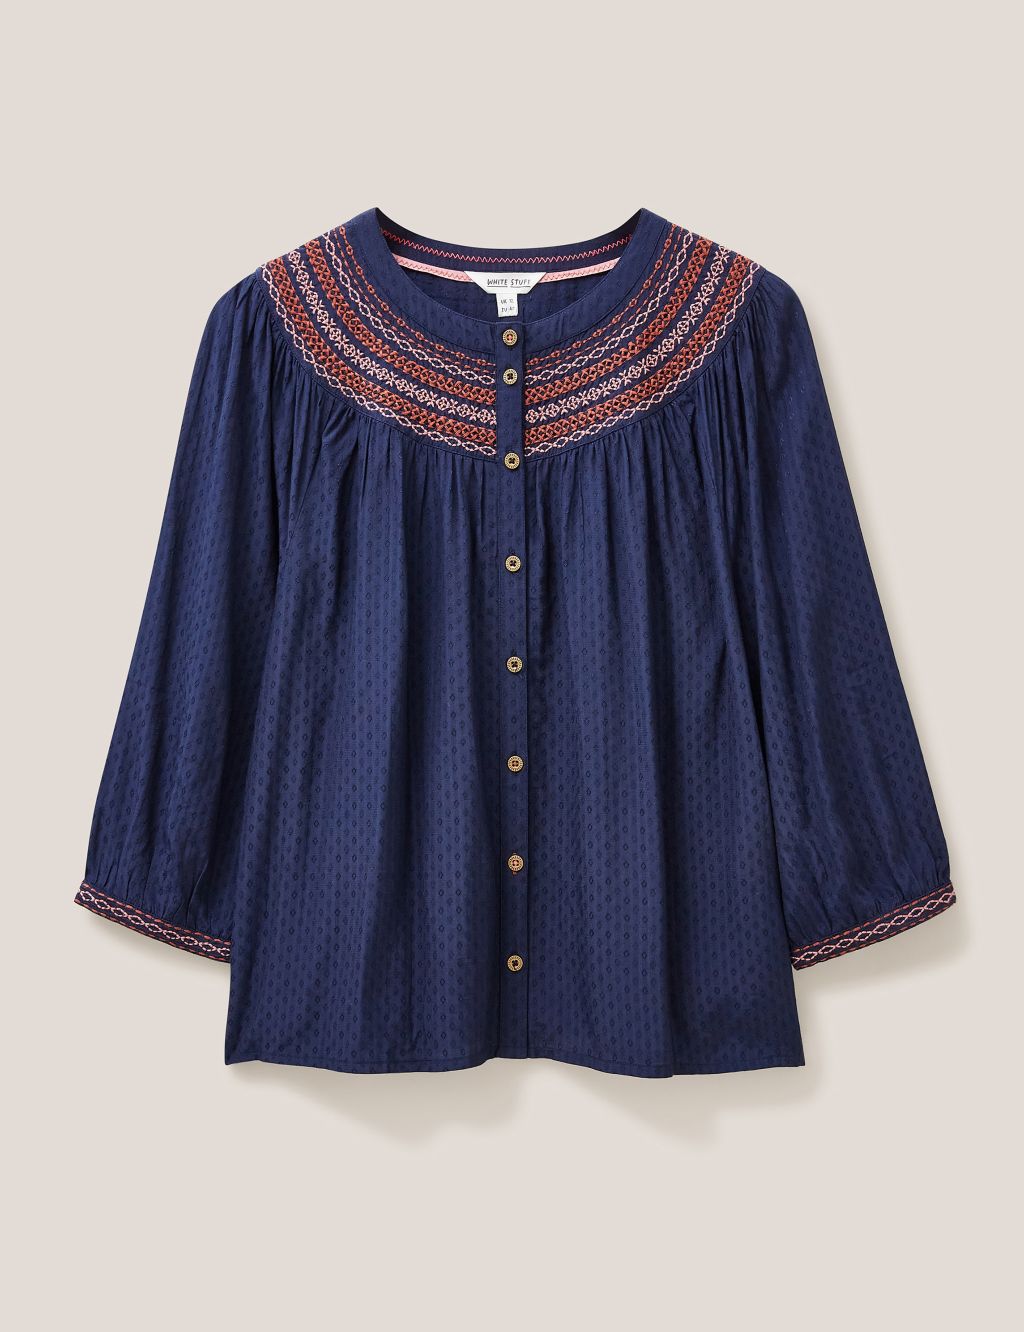 Embroidered Round Neck Blouse image 1